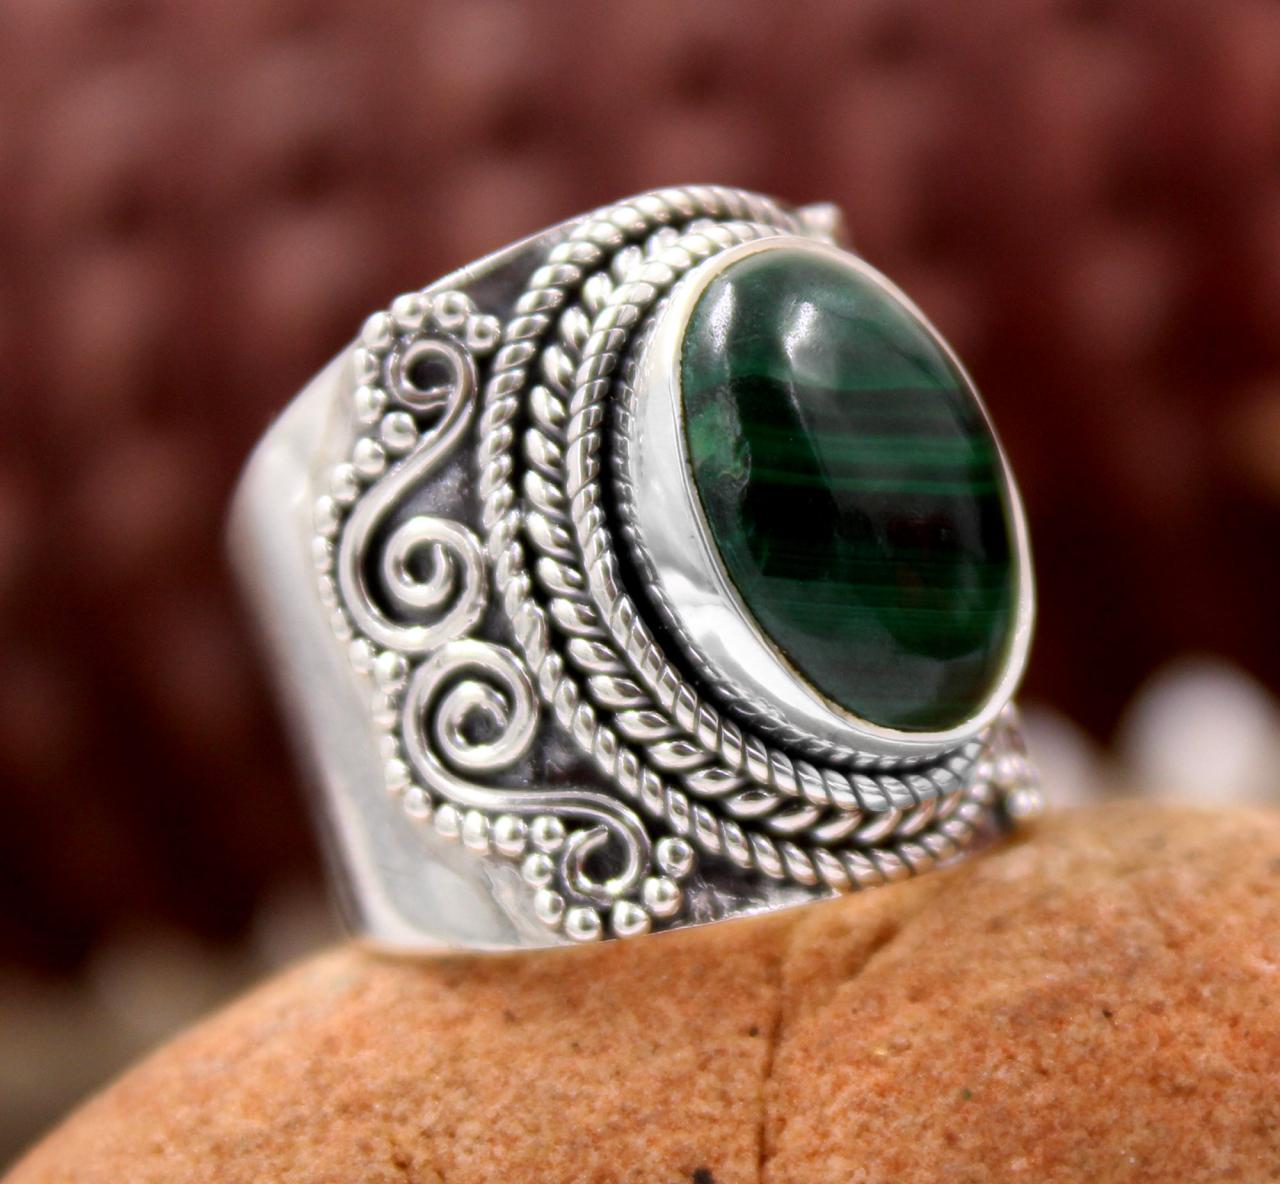 Vintage Malachite Ring Solid 925 Sterling Silver Gemstone Jewelry,birthday Gift For Mom,ethnic Partywear Gift For Girl Friend Ring Size 7us